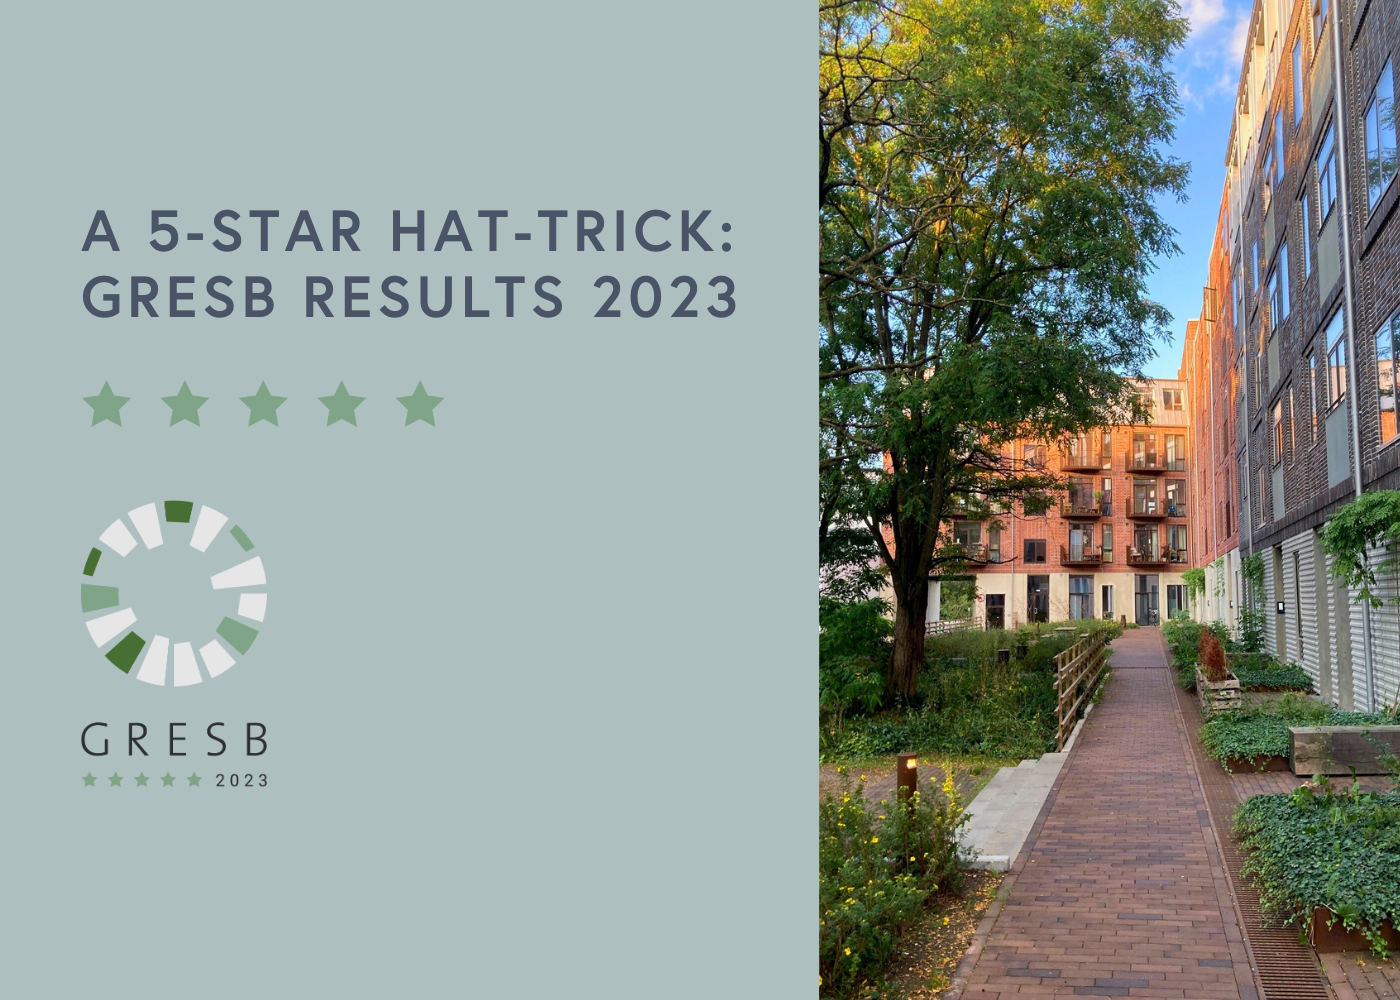 A 5-star hat-trick: Europa announce GRESB results 2023